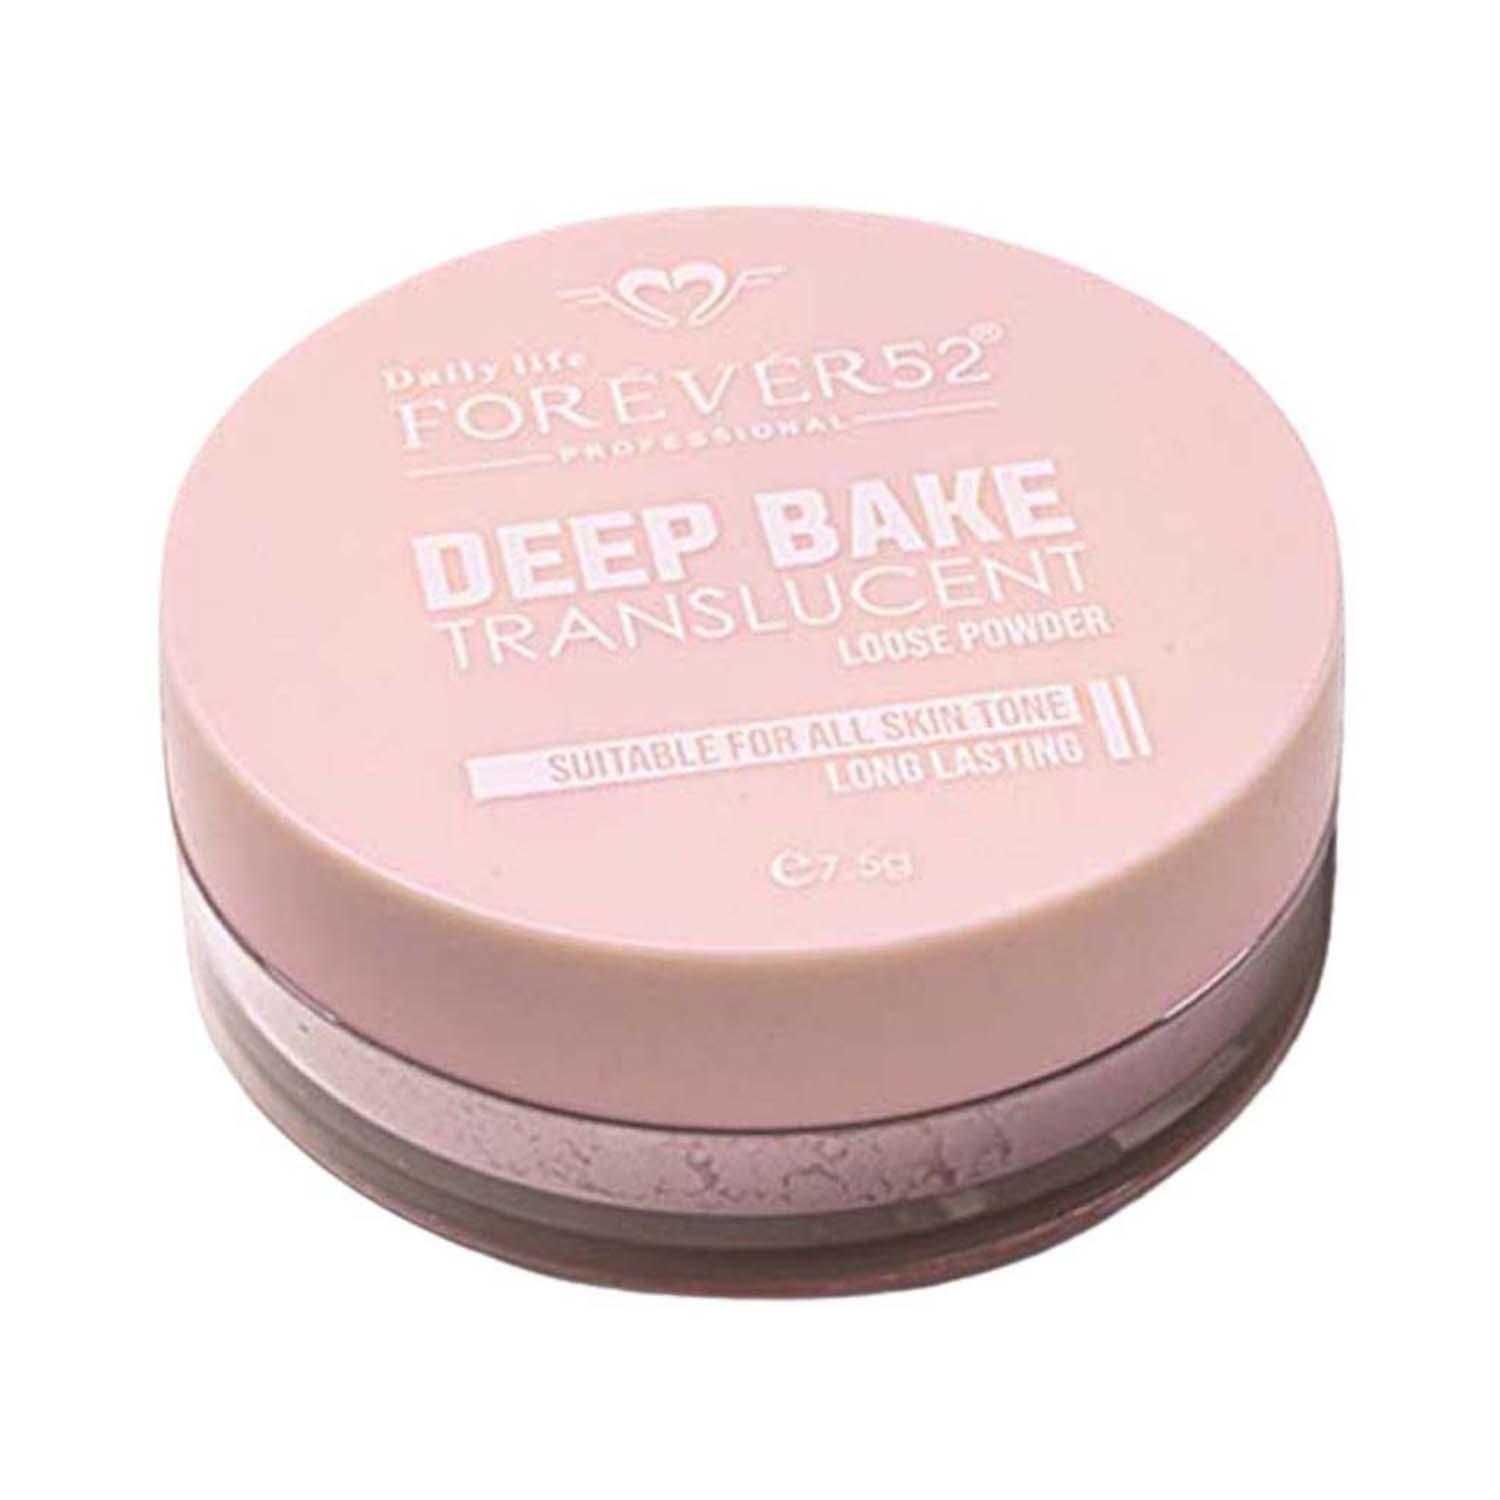 Daily Life Forever52 | Daily Life Forever52 Deep Bake Translucent Matte Loose Powder - Pink (7.5 g)